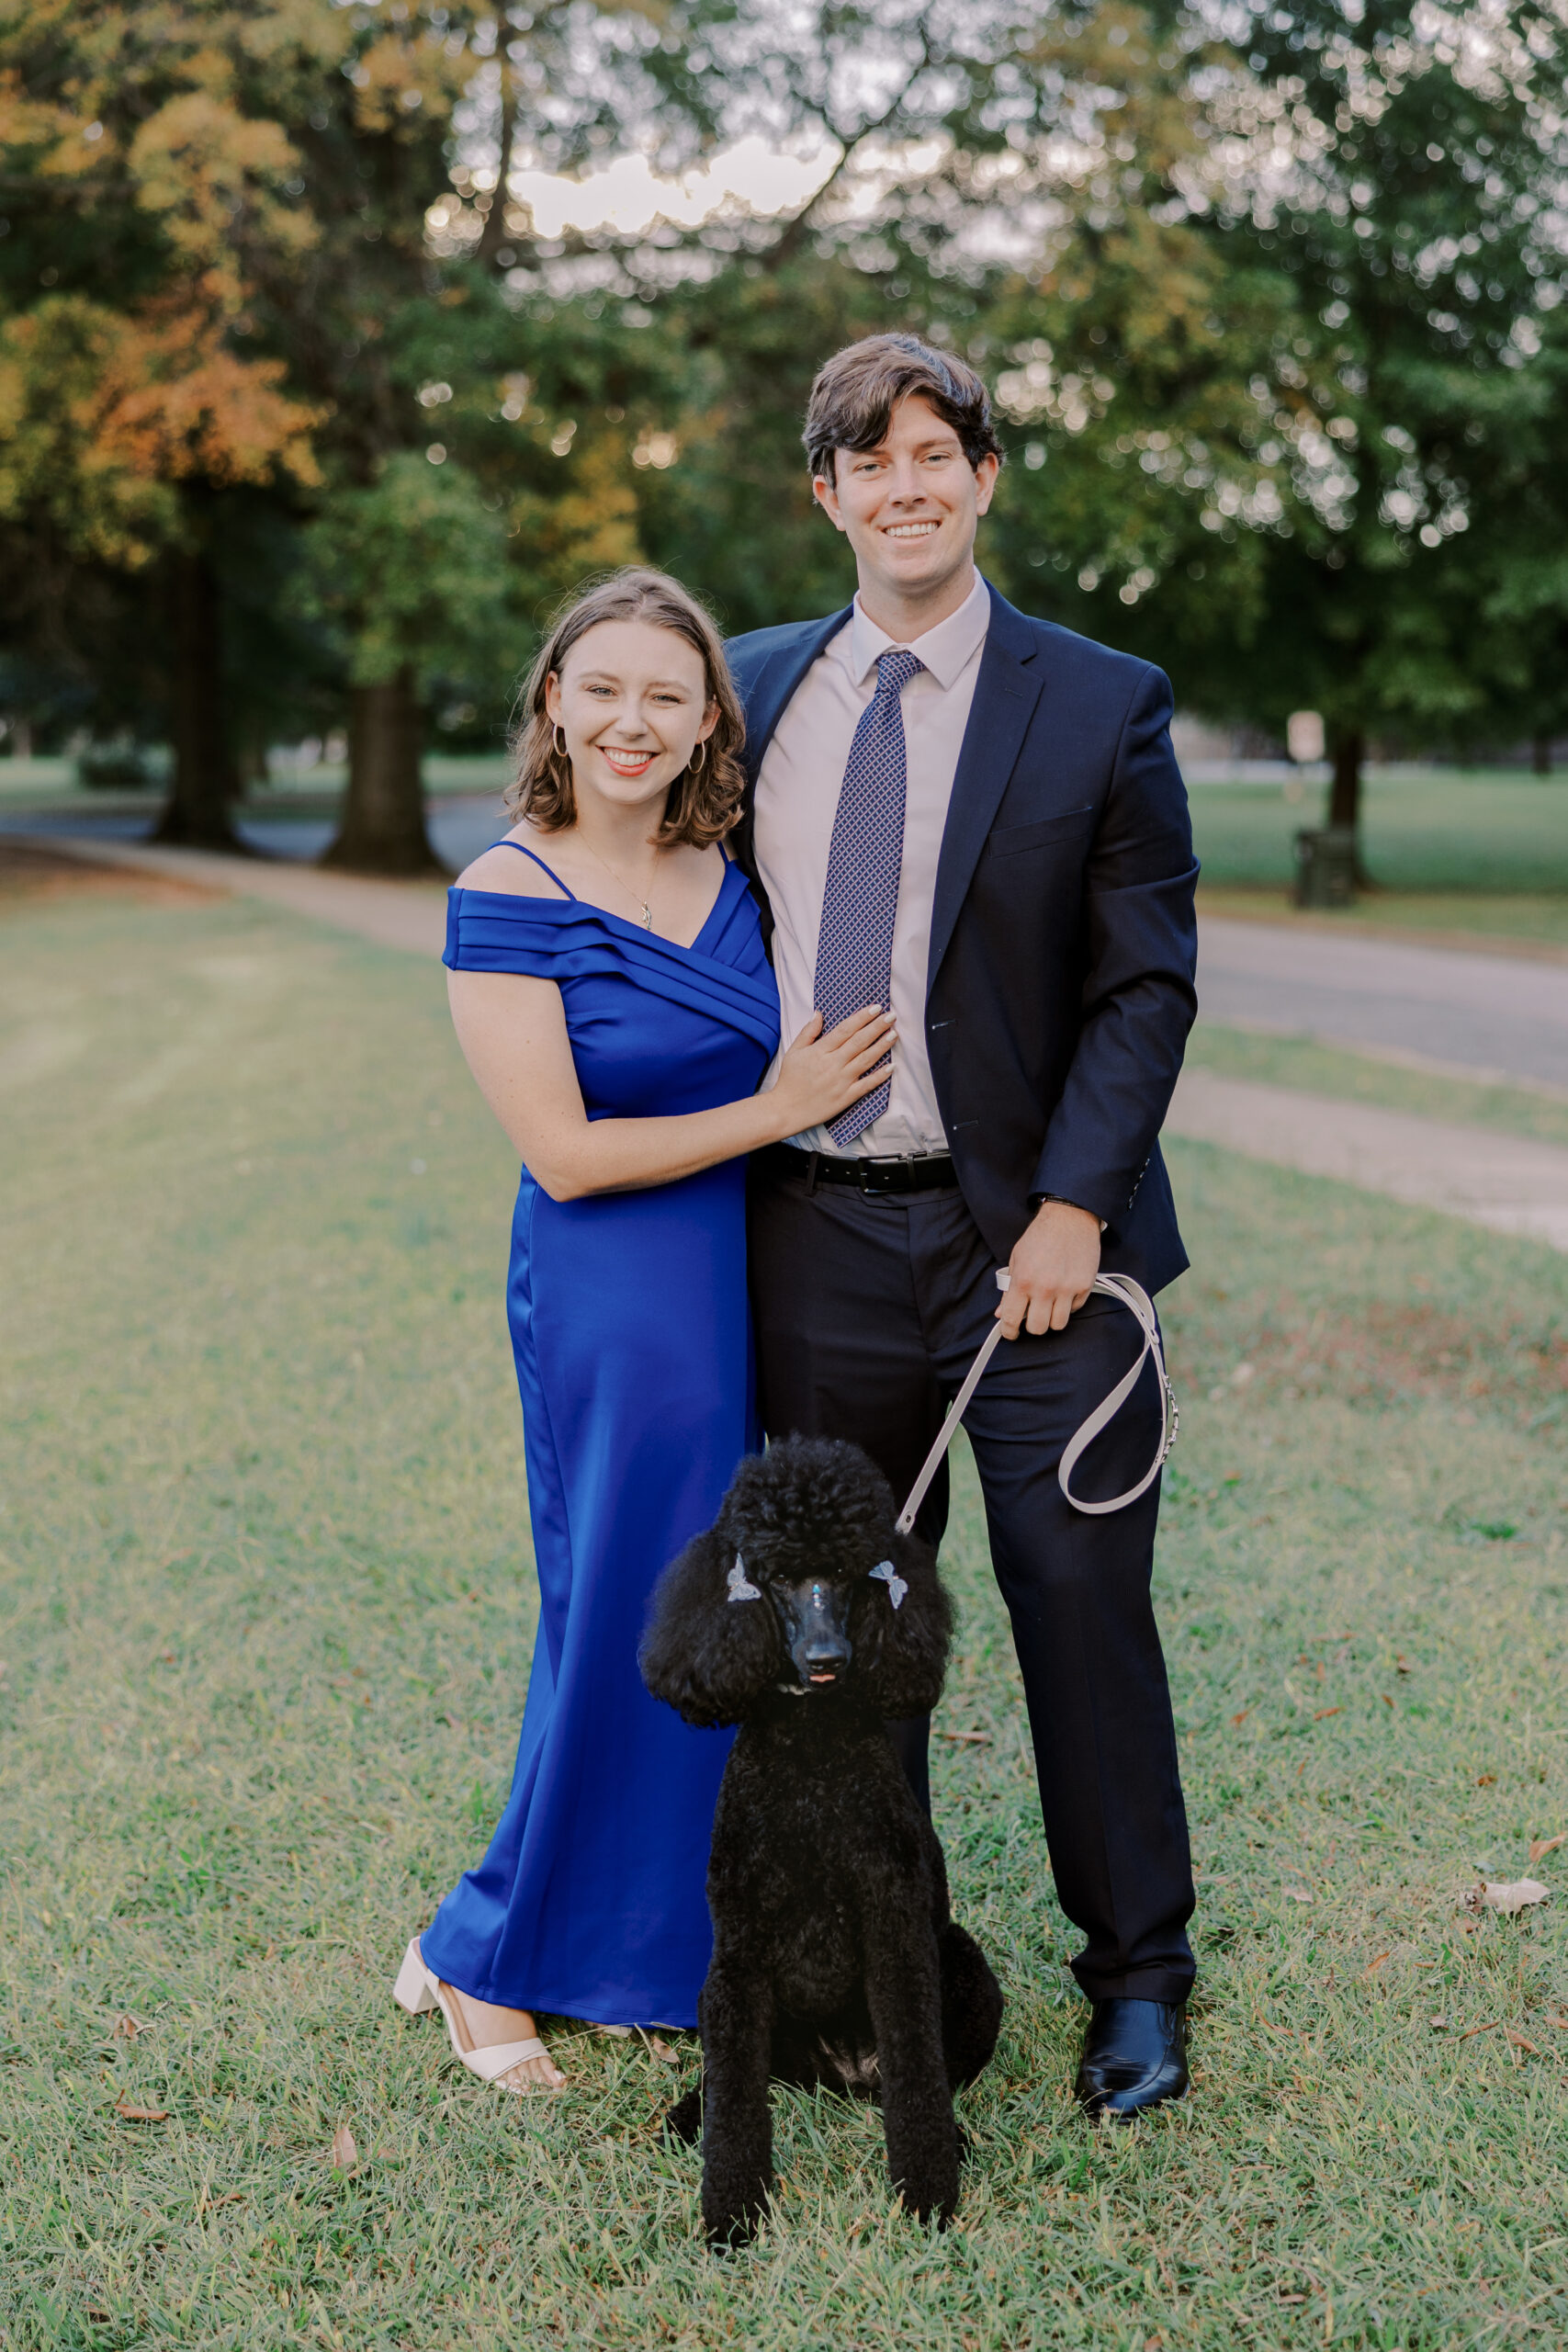 Woman in blue dress standing with her fiance in a suit, and their black poodle at byrd park